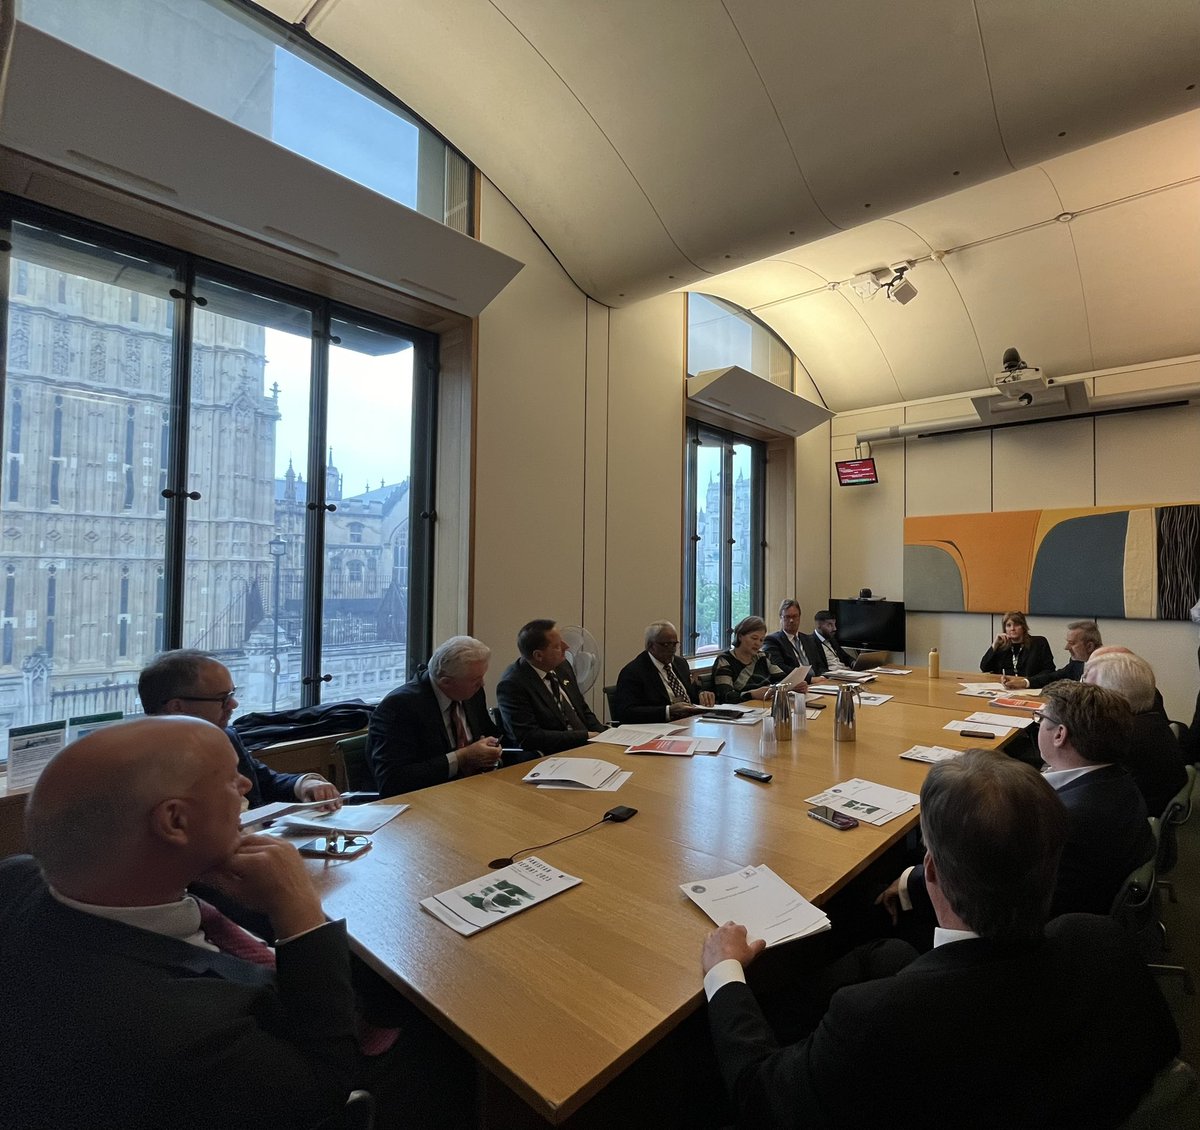 1/2: Our #AGM held today saw strong attendance of parliamentarians and the election of the following officers for the next parliamentary year: a. Chair: Dame @Siobhain_Mc b. Vice-Chair: Sir @EdwardJDavey c. Secretary: @PutneyFleur d. Treasurer: @ElliotColburn